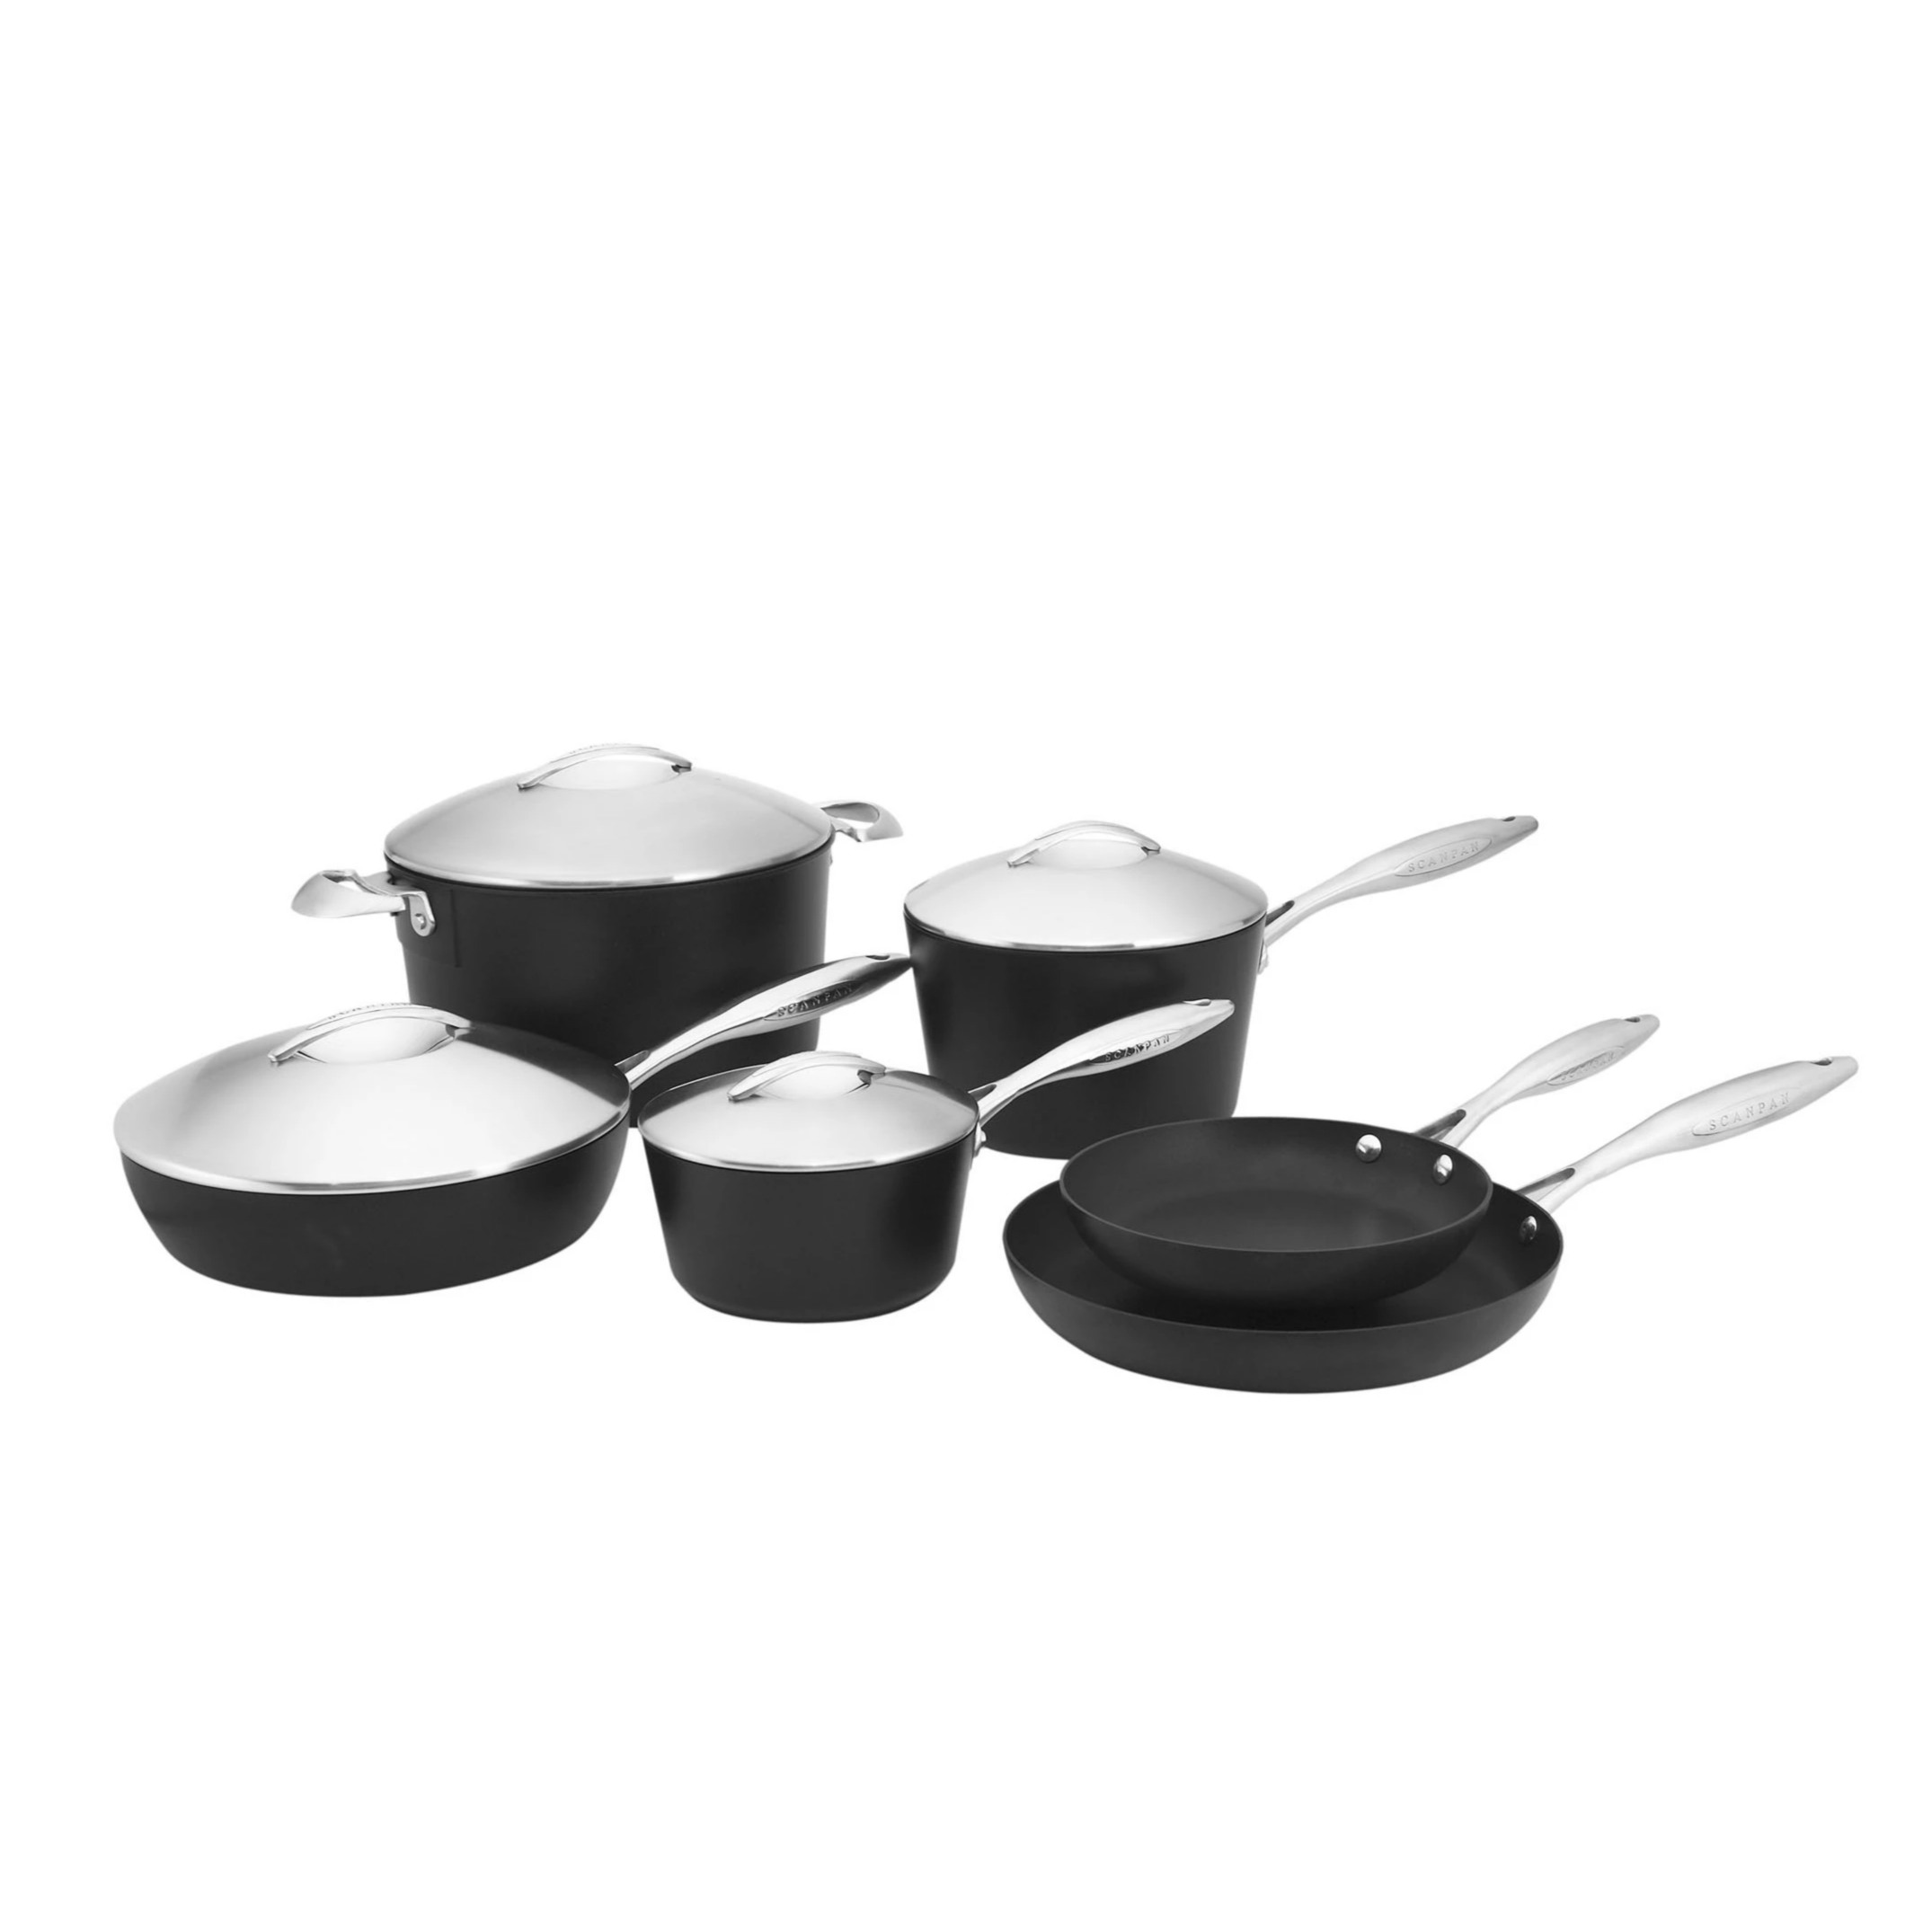 KitchenAid Architect Nonstick (Macy's exclusive) Cookware Review